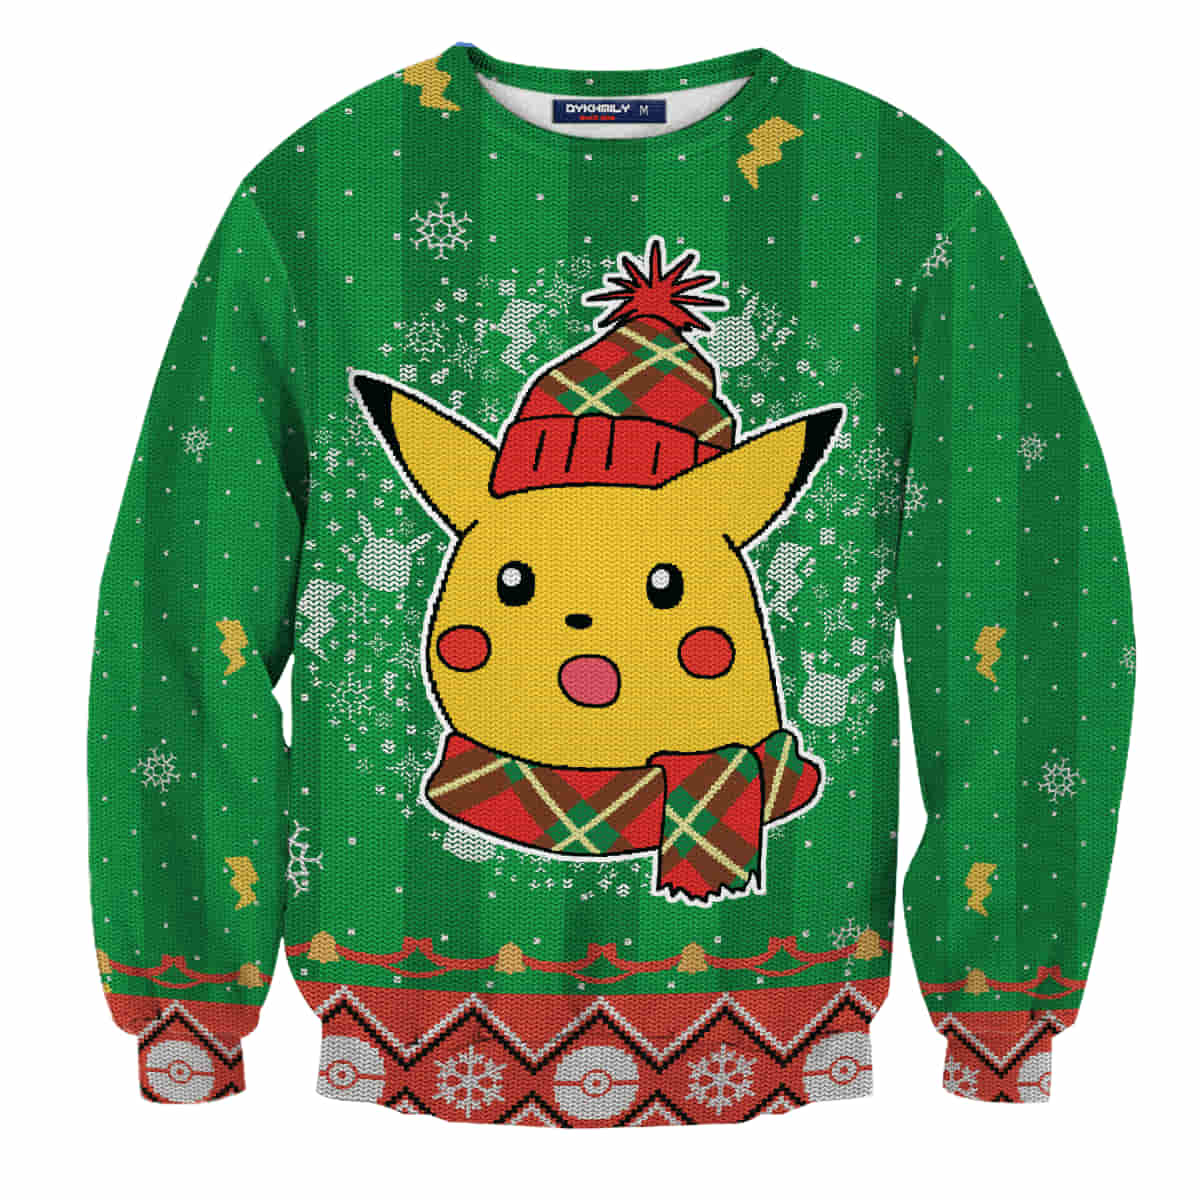 Surprise Pikachu Wool Knitted Sweater, Christmas 3D Sweater